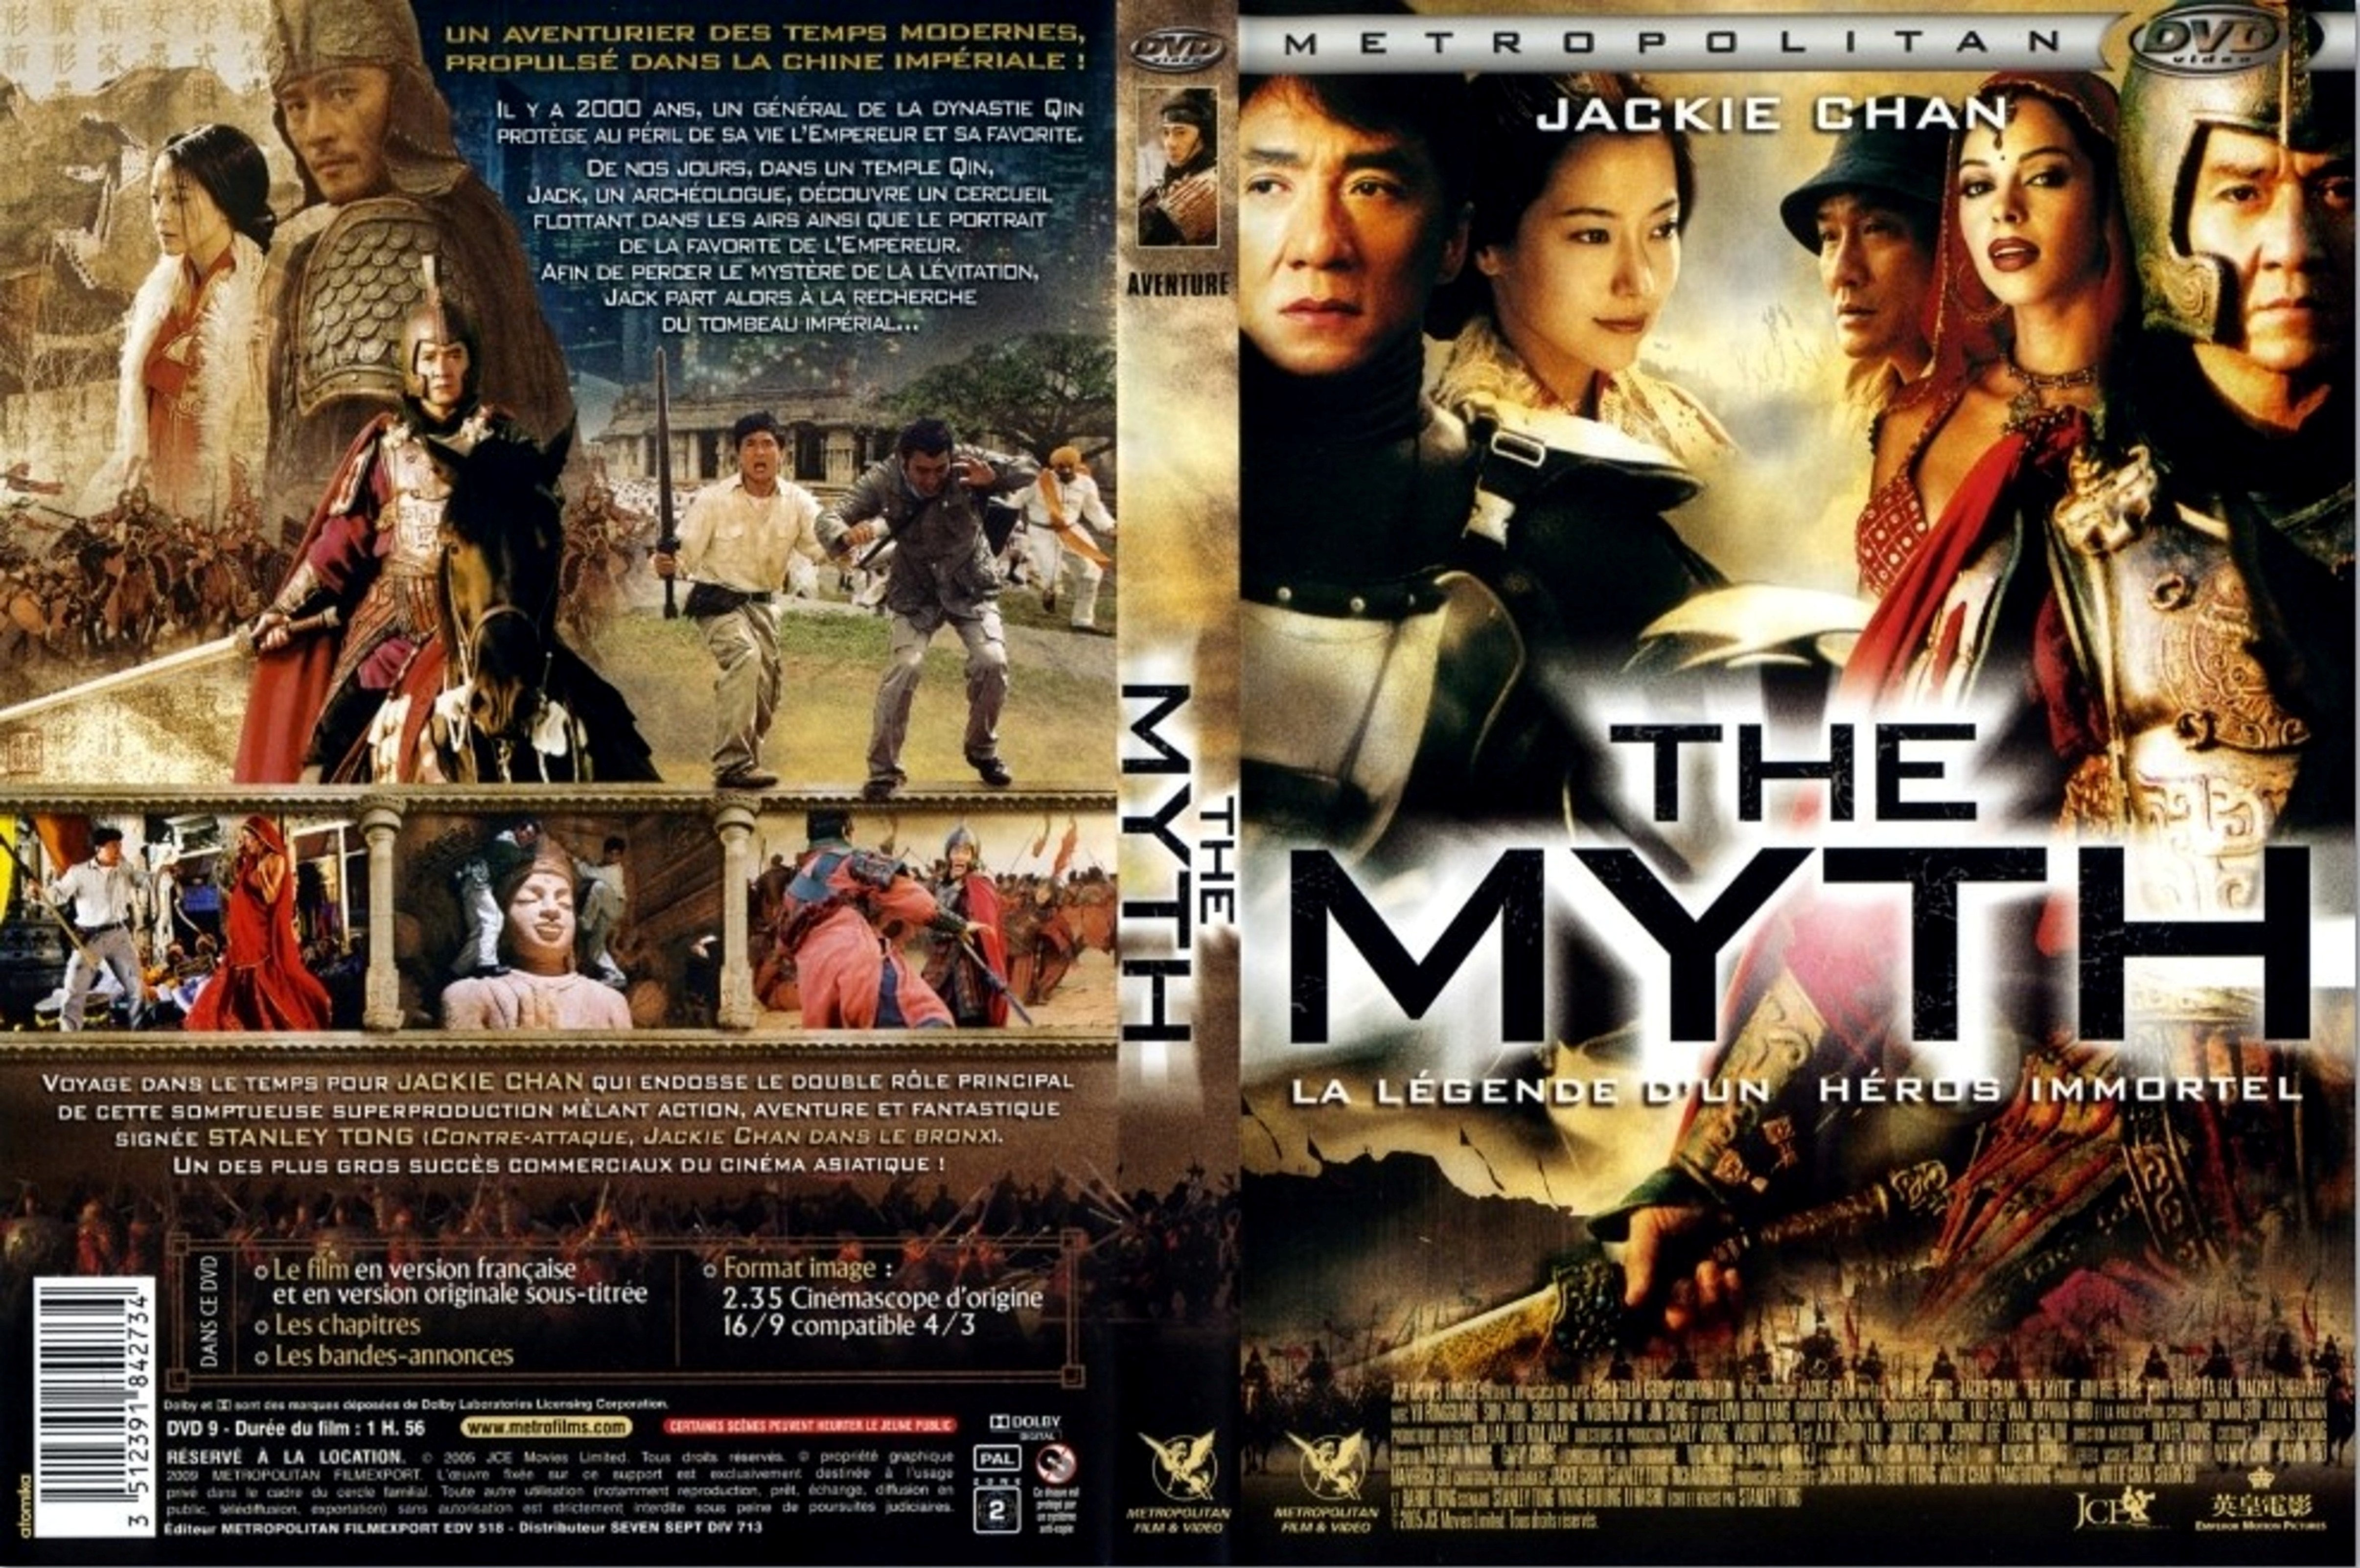 Jaquette DVD The myth (Jackie Chan) v2